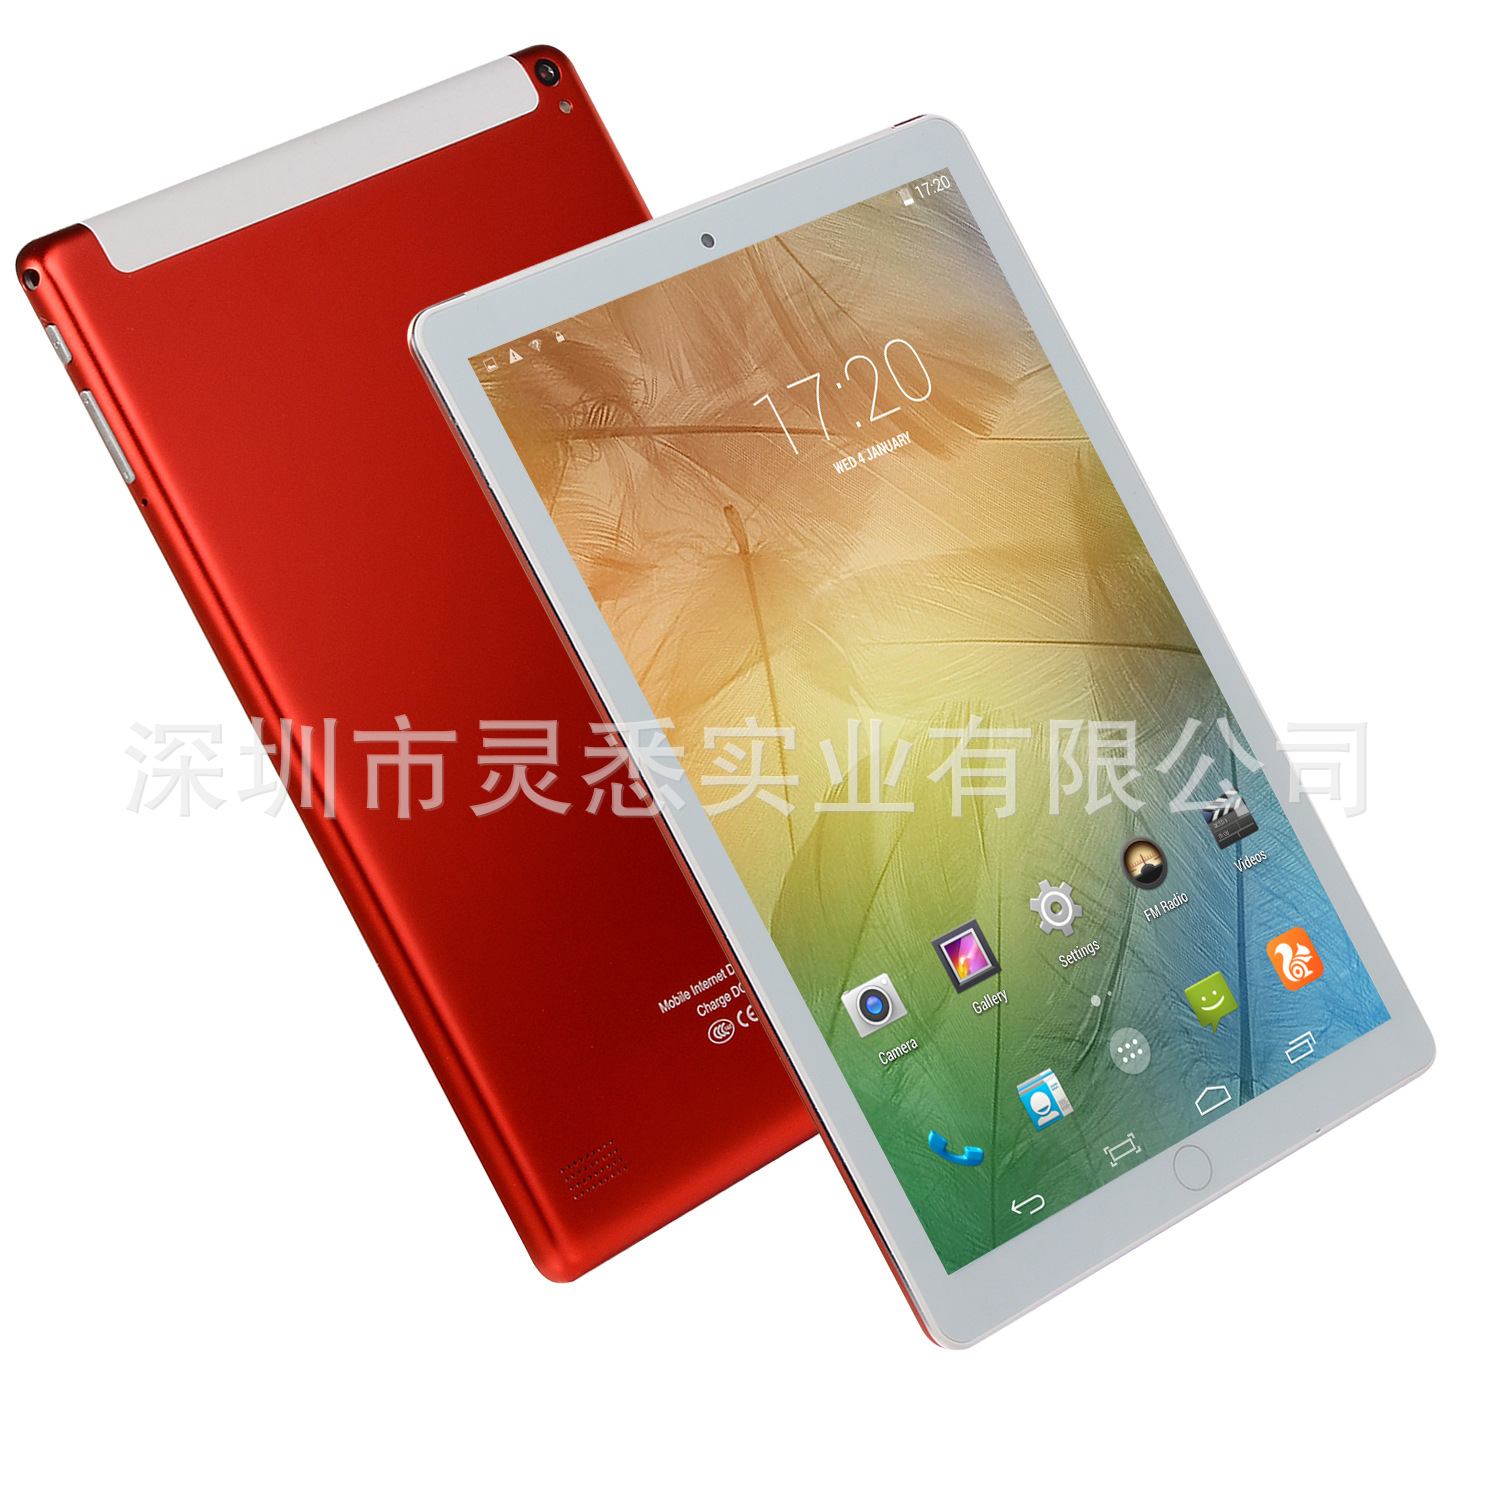 Tablette MIQOO 101 pouces ANDROID - Ref 3422118 Image 15